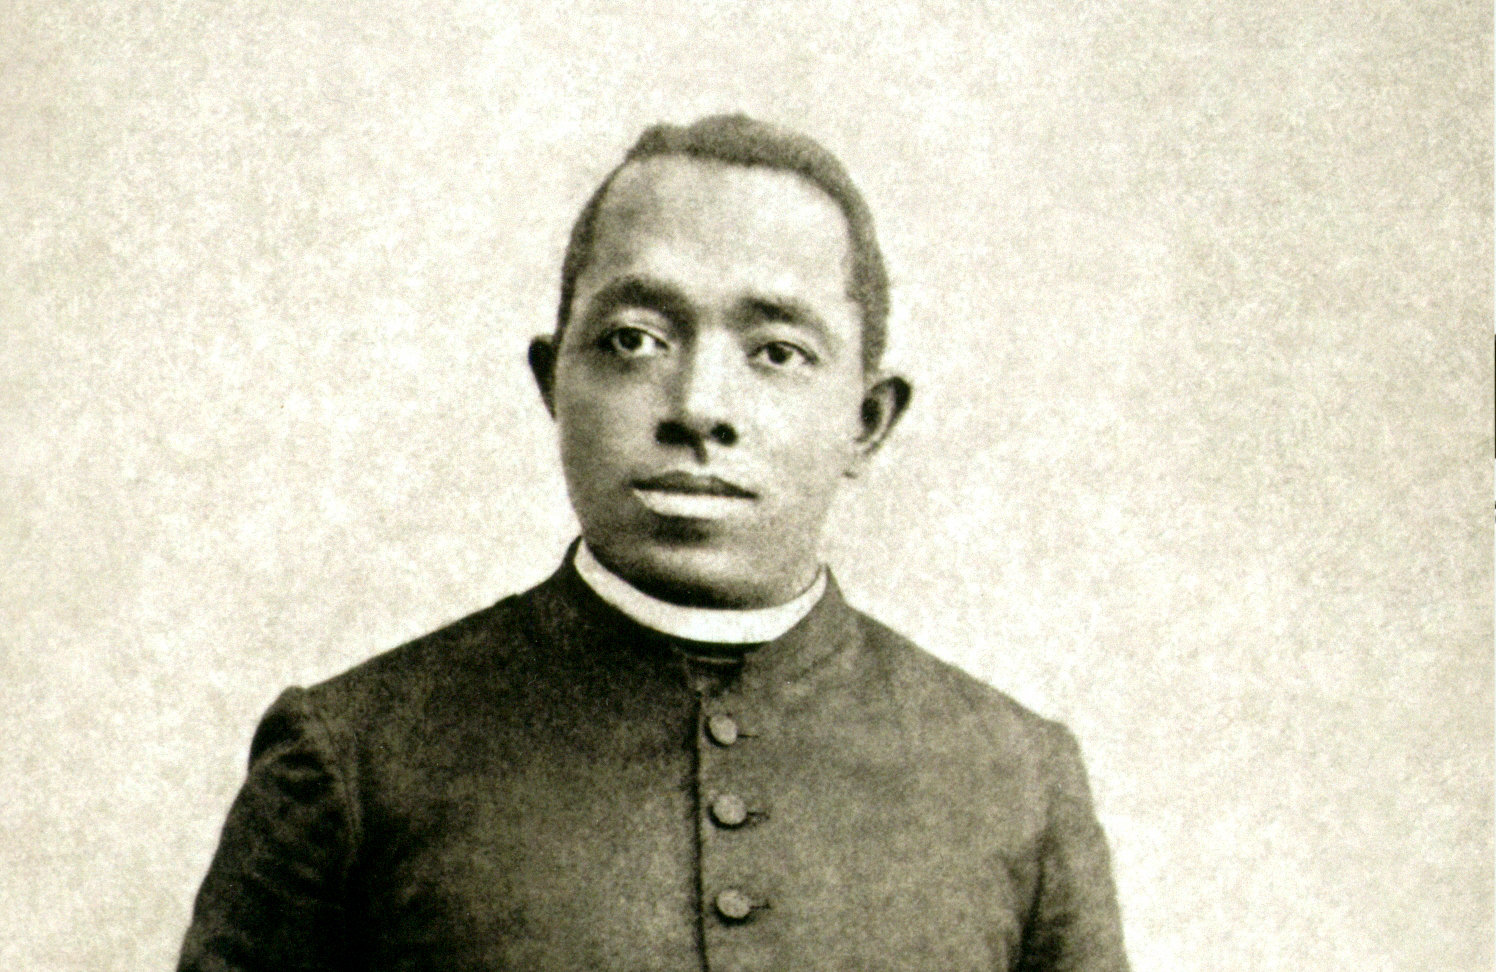 Father Augustine Tolton, also known as Augustus, is pictured in an undated photo. Born into slavery in Missouri, he was ordained a priest April 24, 1886, in Rome, and said his first Mass at St. Peter's Basilica.  Father Tolton, a candidate for sainthood, has been declared "venerable" by Pope Francis for his "virtuous and heroic life."